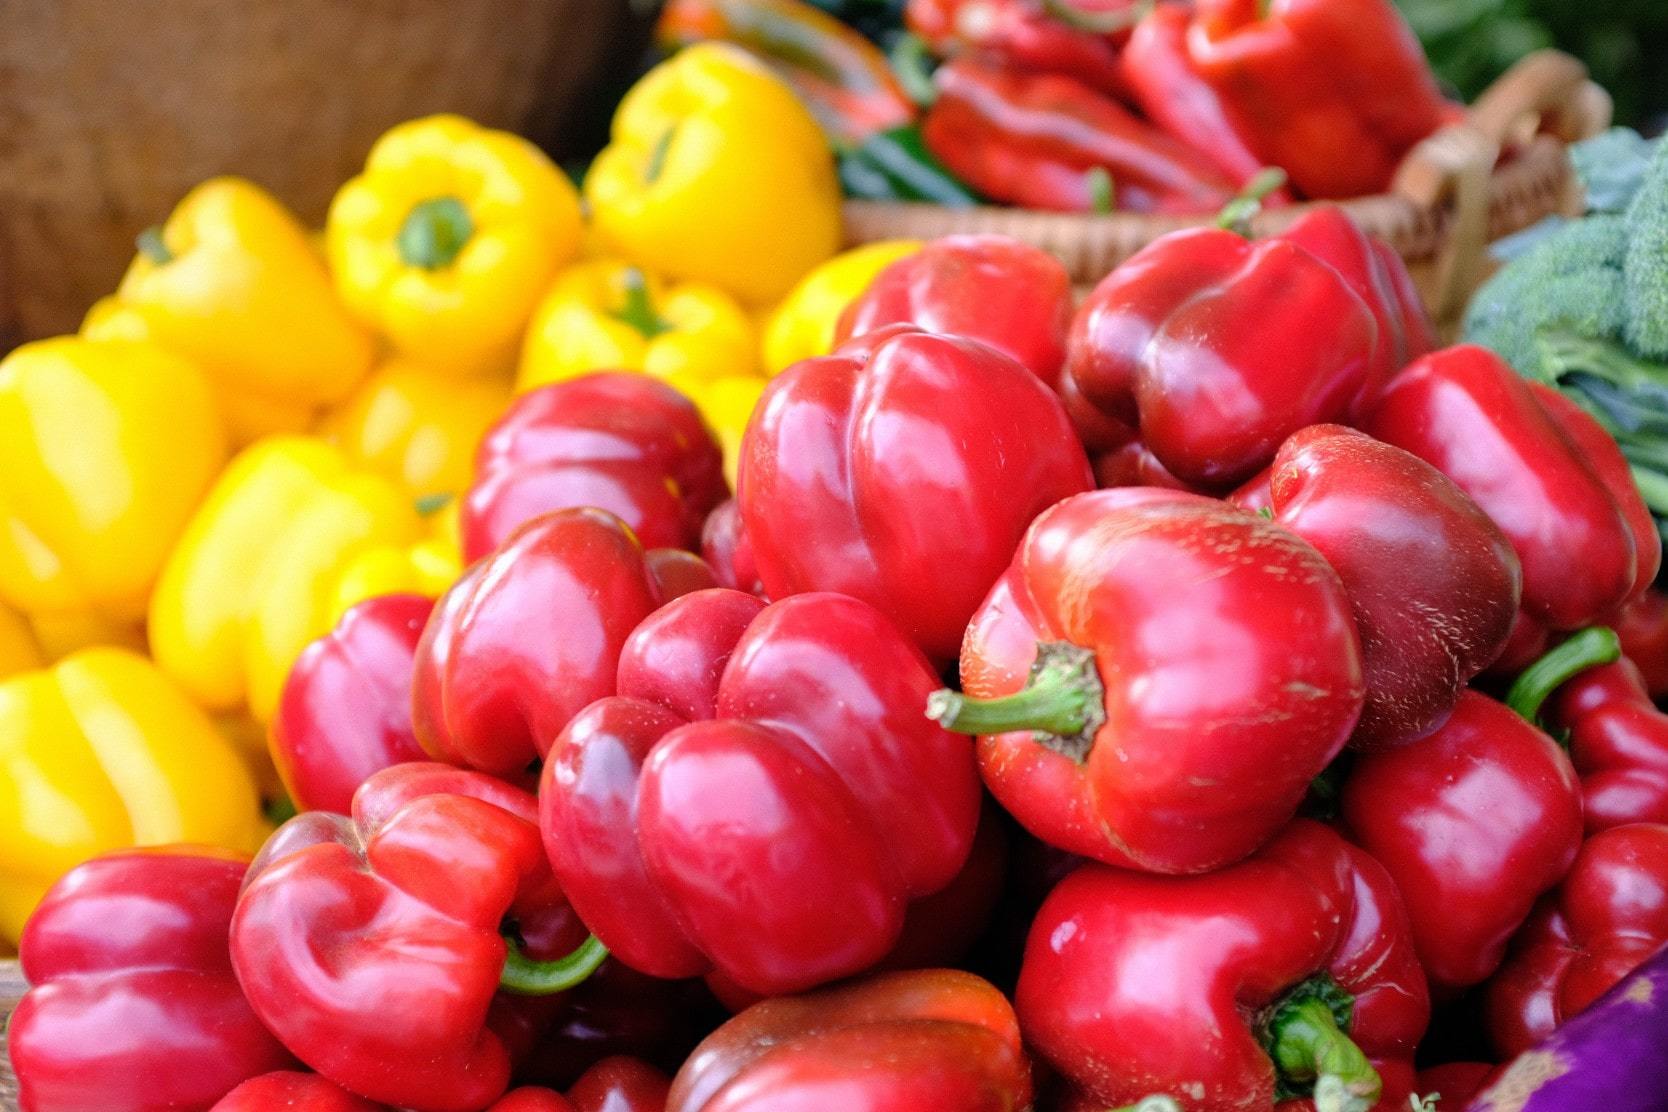 Freshly red and yellow peppers on display at a Farmer's Market in Florida